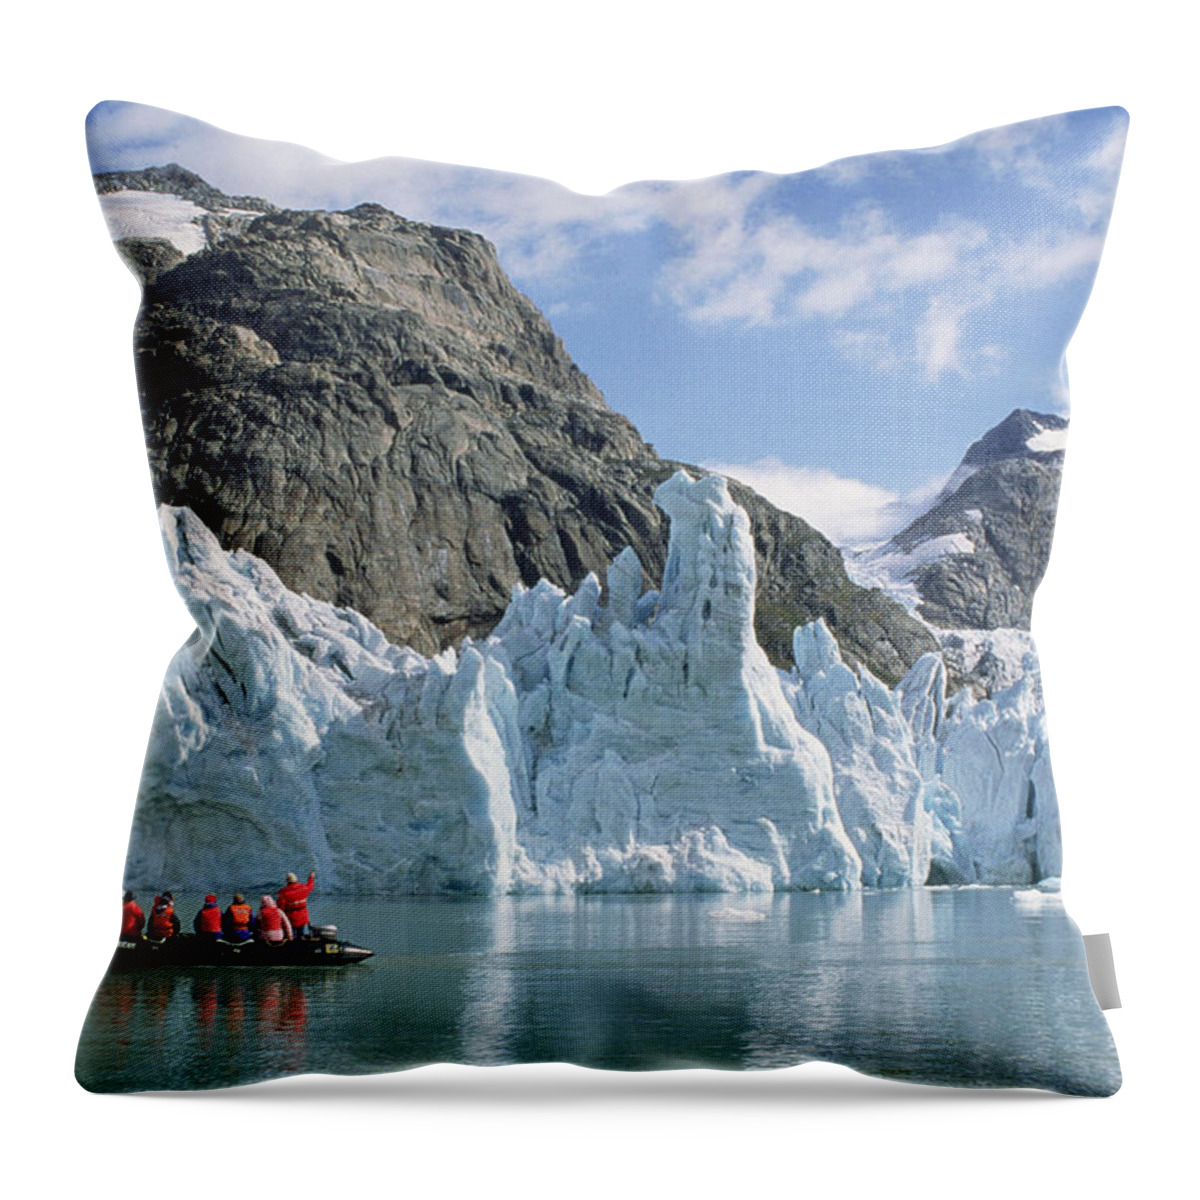 Feb0514 Throw Pillow featuring the photograph Tourists At Glacier Southern Greenland by Tui De Roy